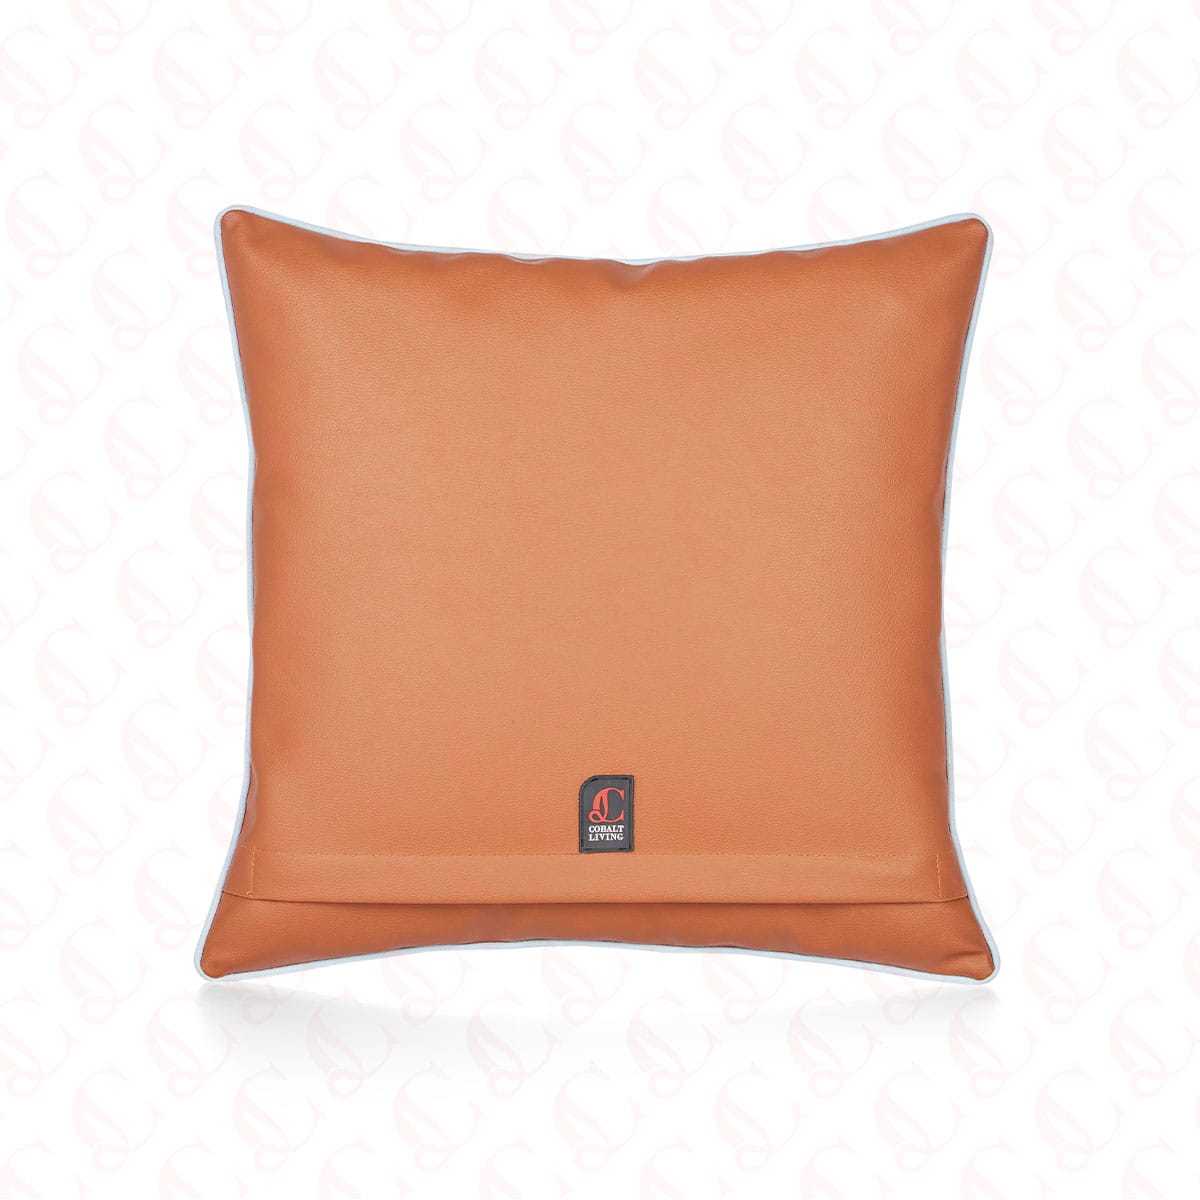 Designer Leather Cushion Cover Online